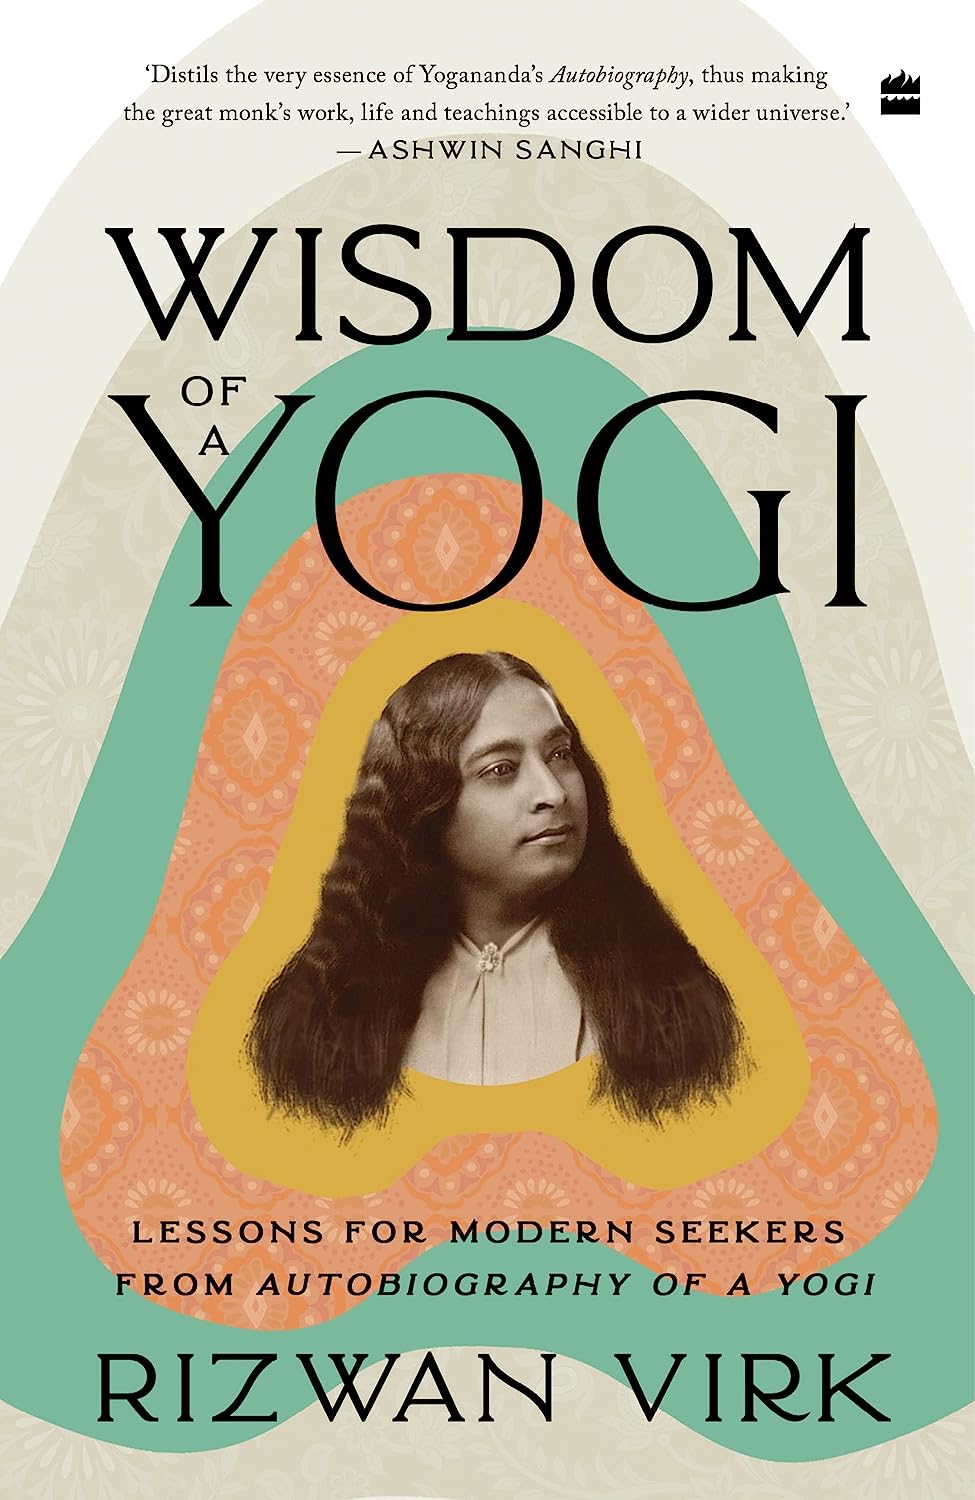 "Wisdom of a Yogi": This book brings out the lessons from Paramahansa Yogananda's classic and reinterprets them for the modern age